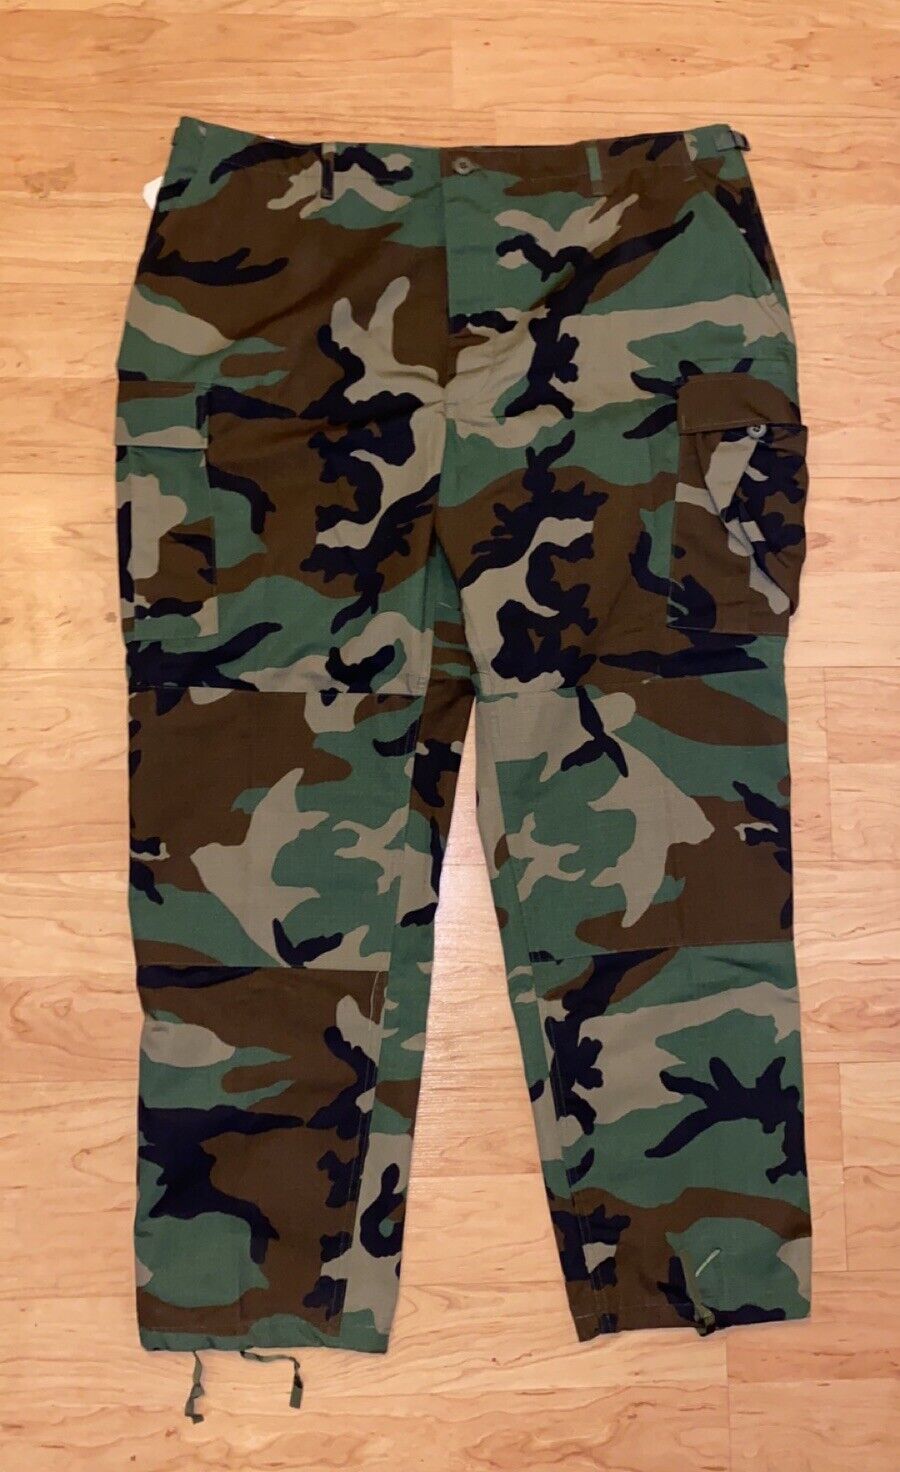 Men’s Propper BDU Army Trousers Size XXLL “ Waist Over 40 Inches”